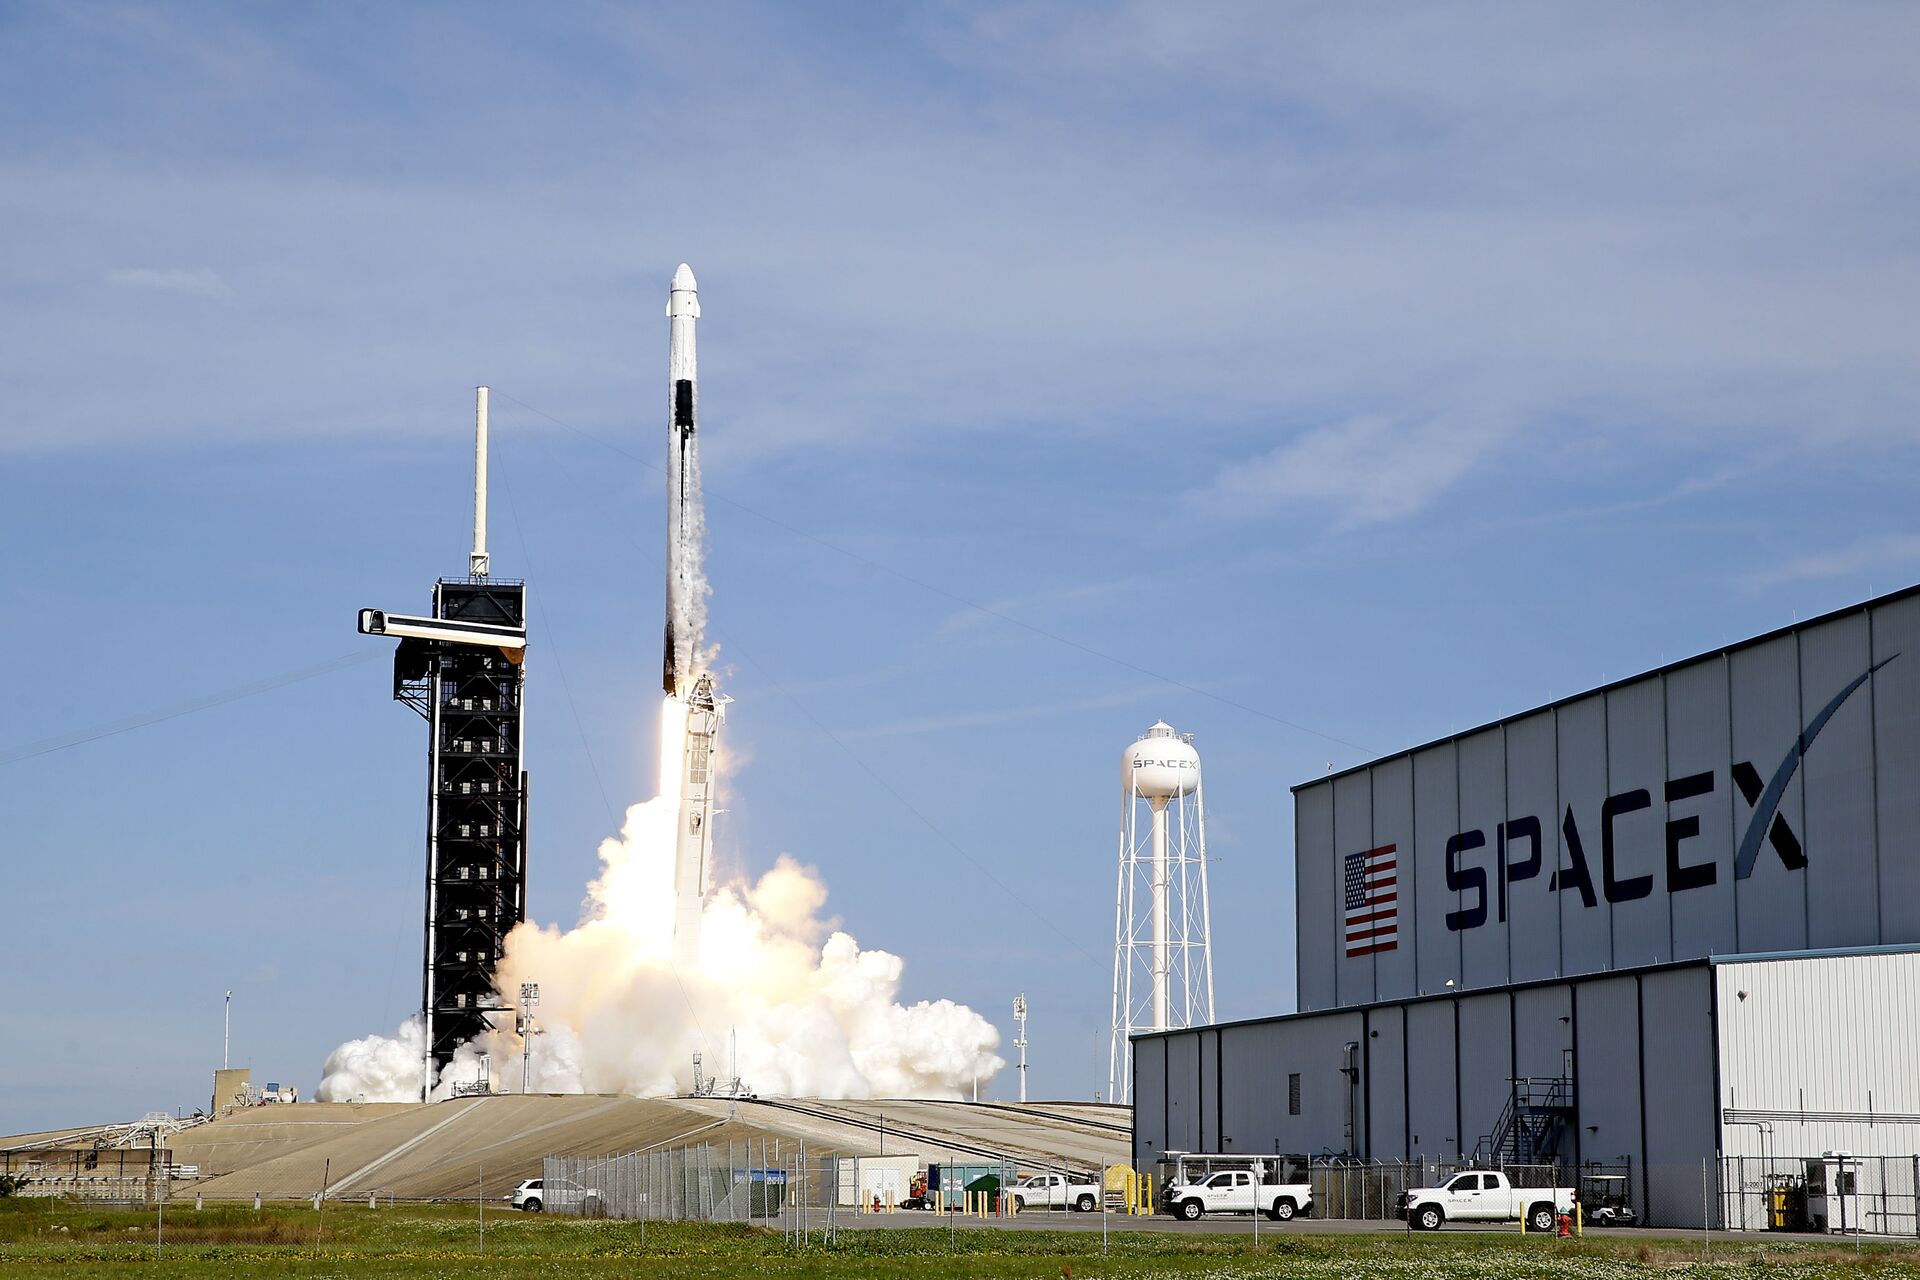 A SpaceX Falcon 9 rocket on a resupply mission to the International Space Station lifts off from pad 39A at the Kennedy Space Center in Cape Canaveral, Fla., Sunday, Dec. 6, 2020. - Sputnik International, 1920, 12.11.2021